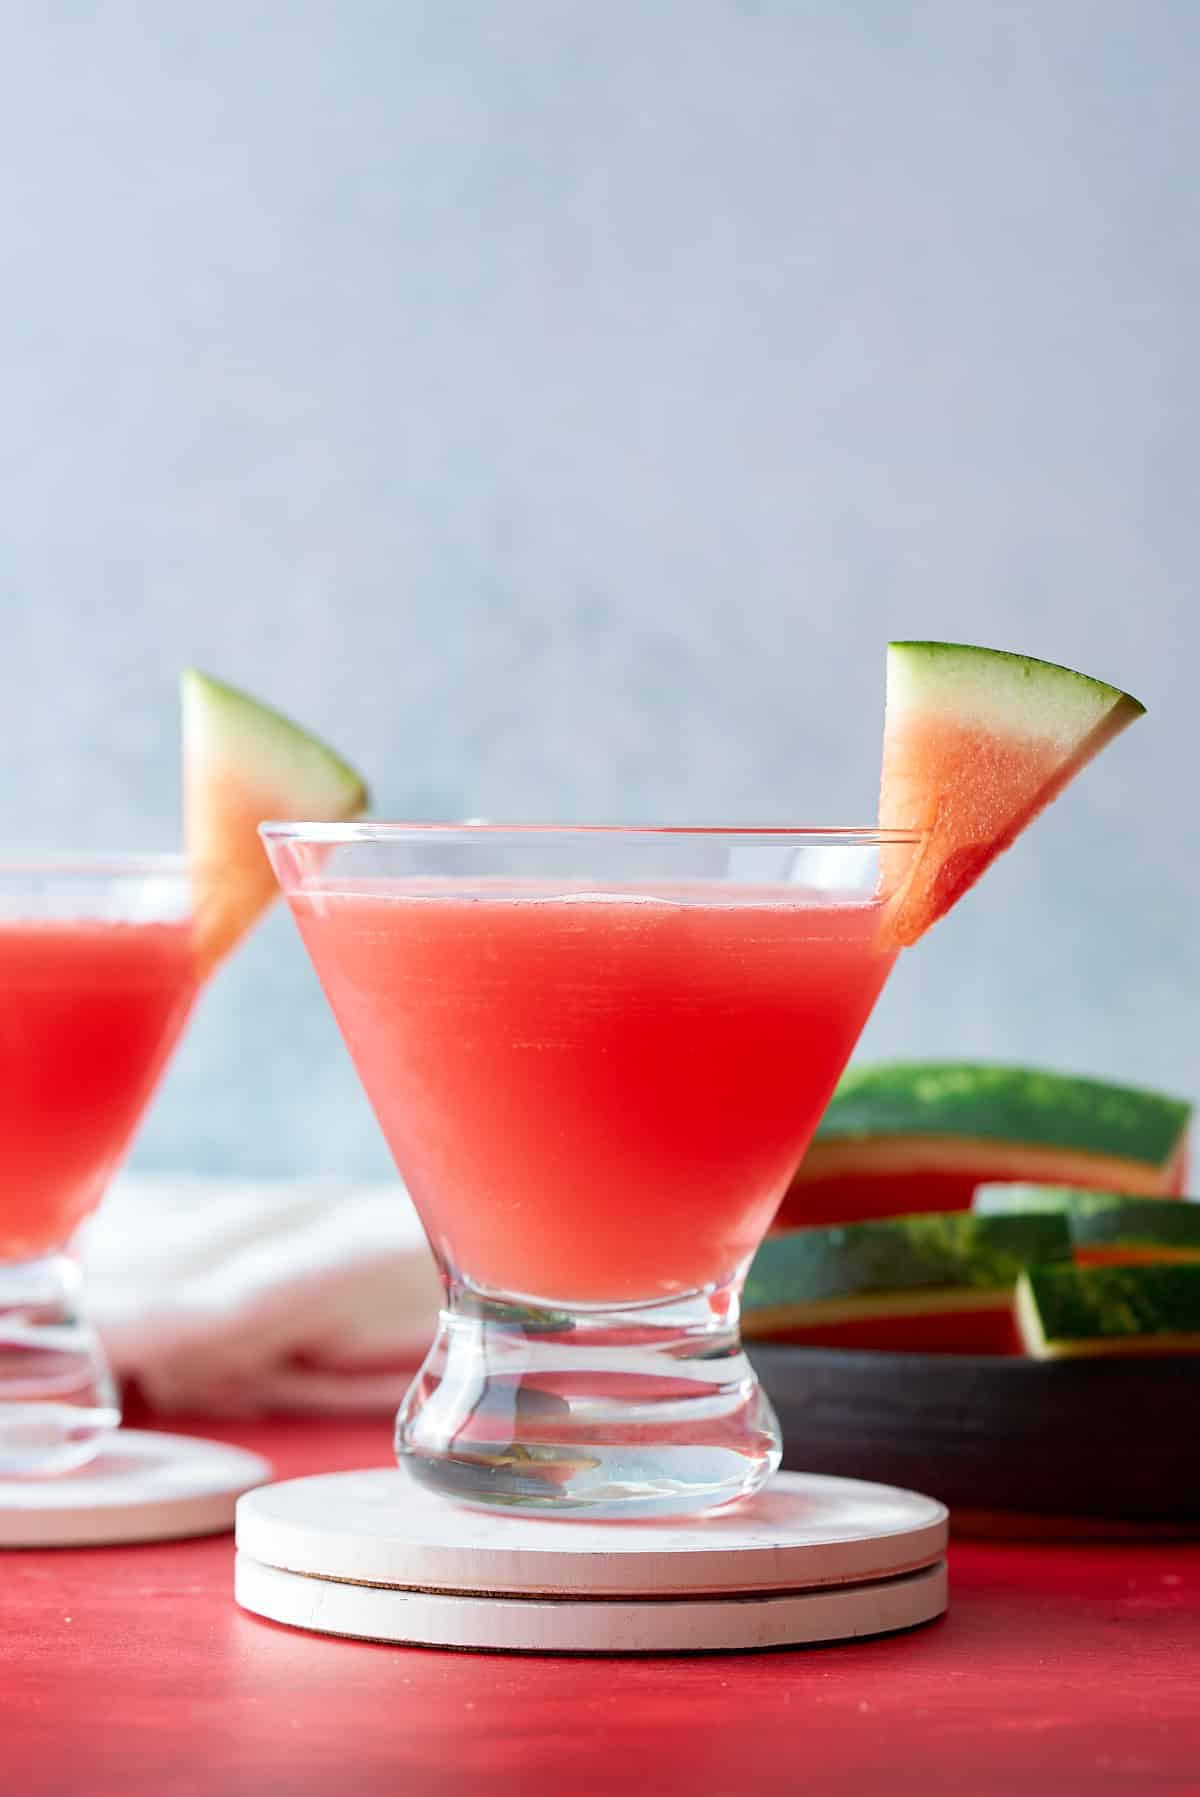 watermelon martini, in glass, in front of sliced watermelon